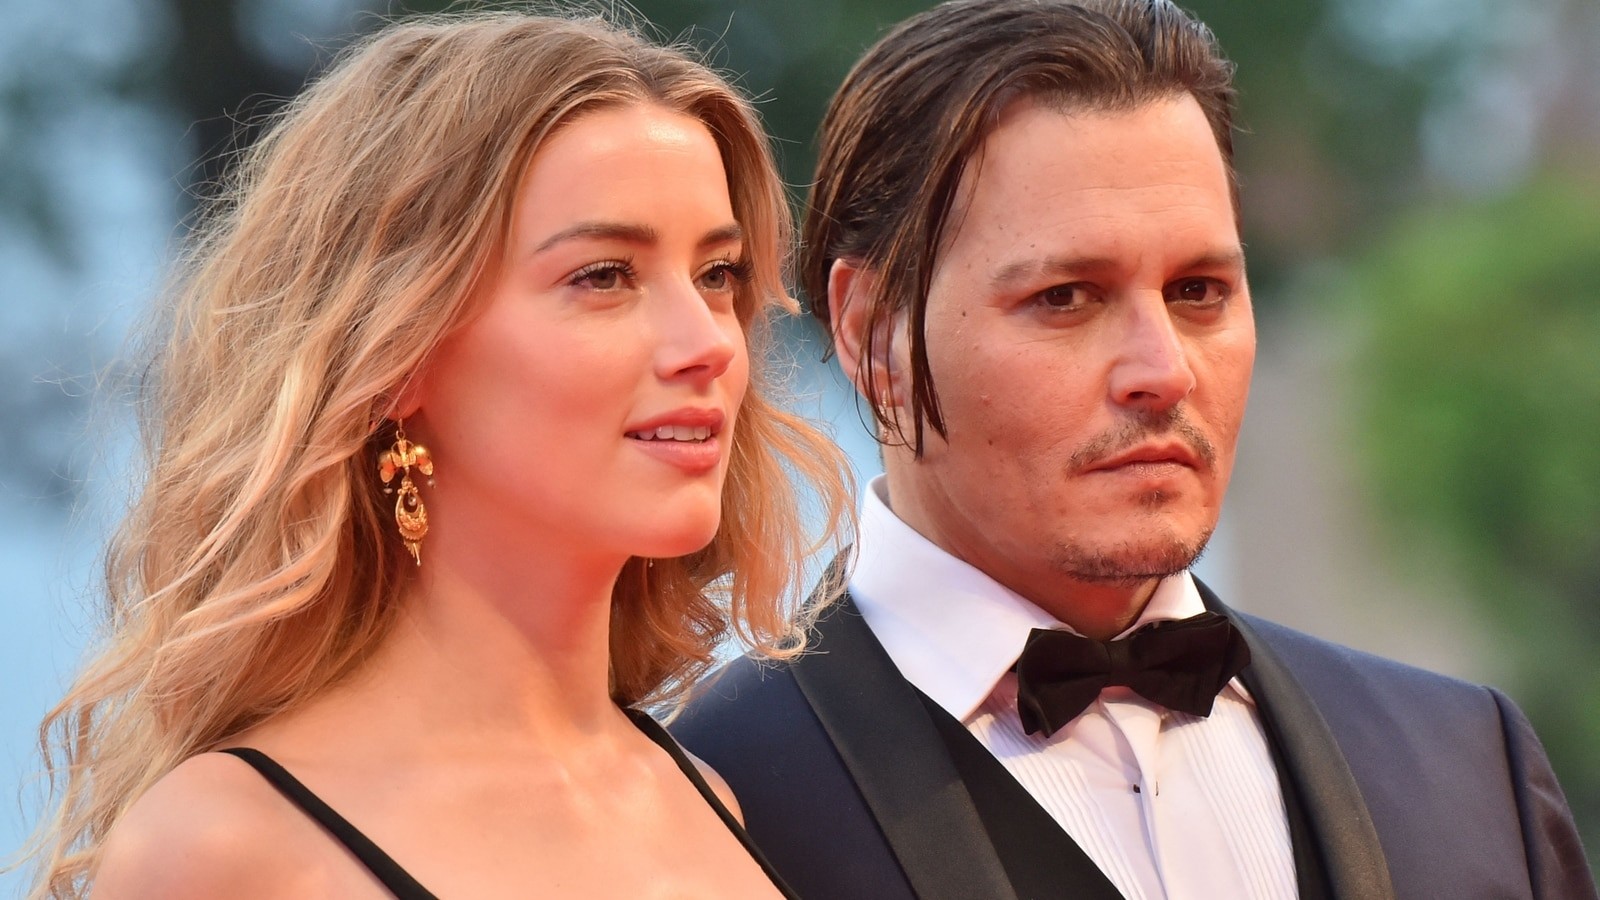 Amber Heard and Johnny Depp's trial had been telecasted across the world.